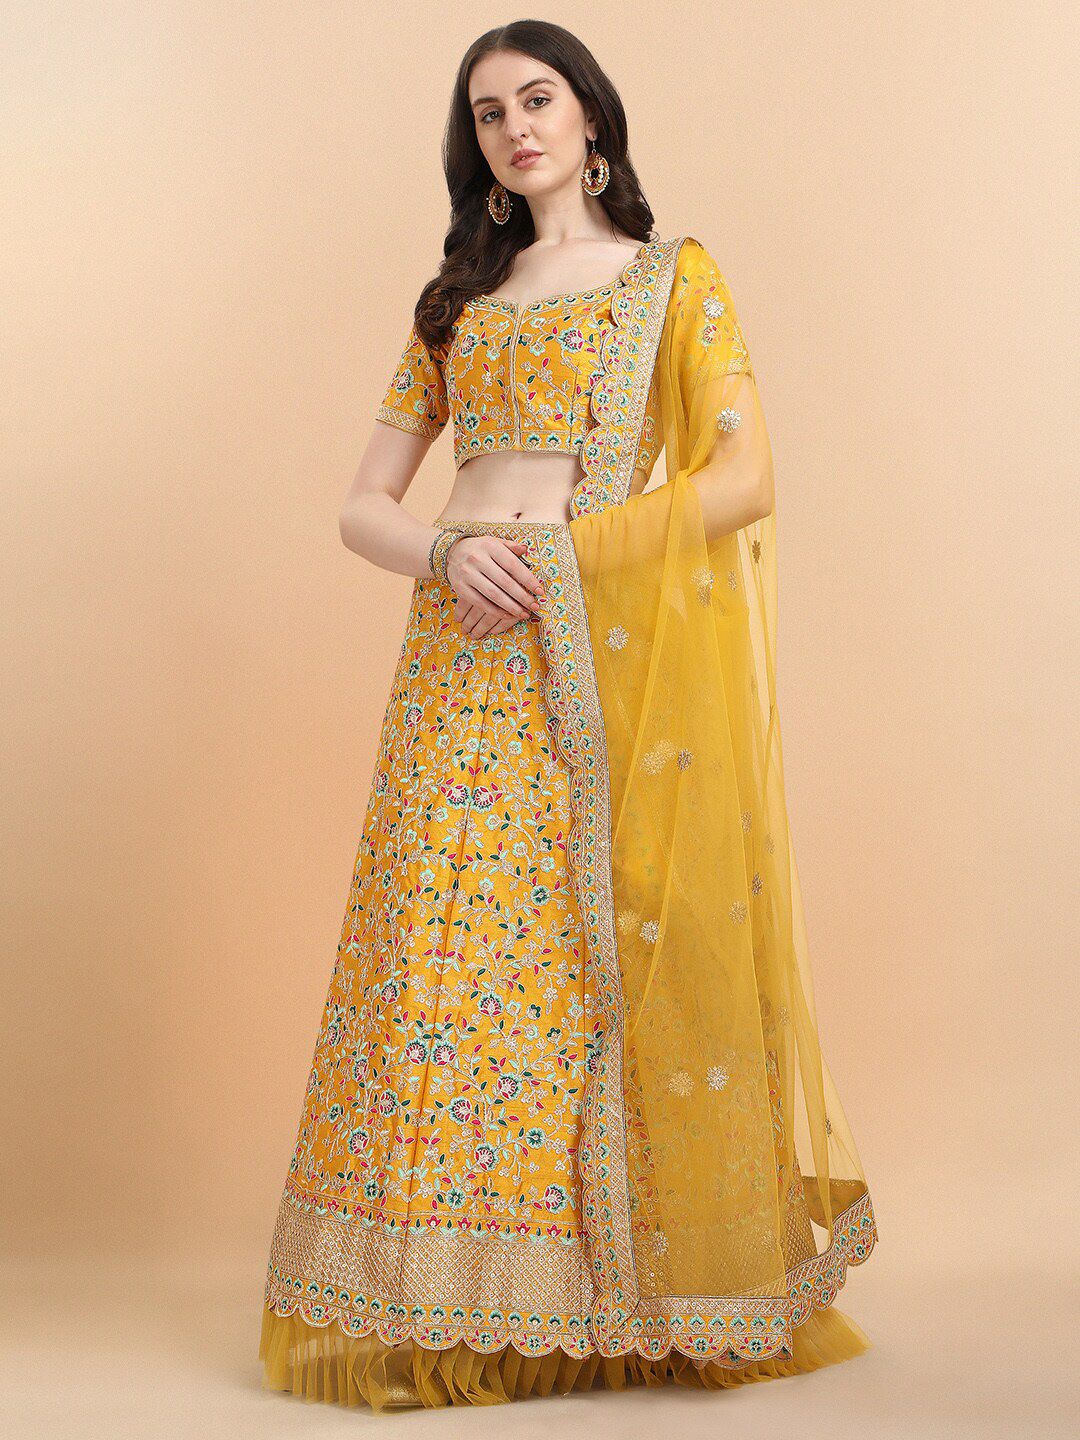 Amrutam Fab Women Yellow Embroidered Semi-Stitched Lehenga, Unstitched Blouse With Dupatta Price in India